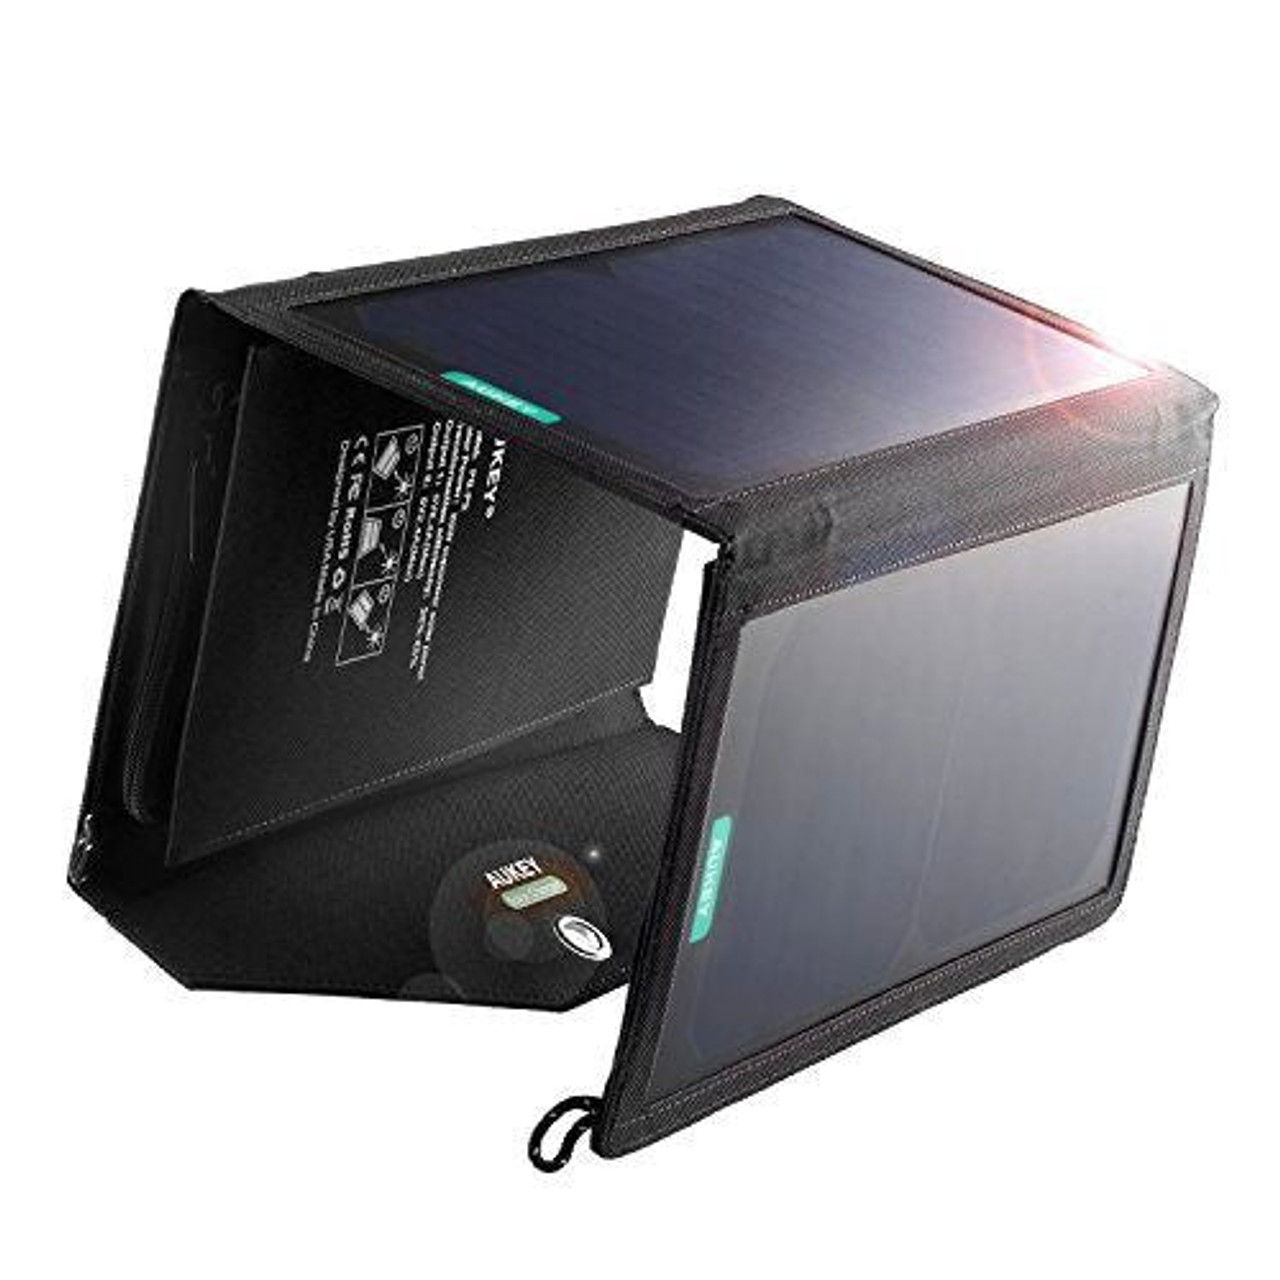 AUKEY 20W Solar Charger Dual USB Port Foldable Portable Fast Charging  Technology - Wires Computing